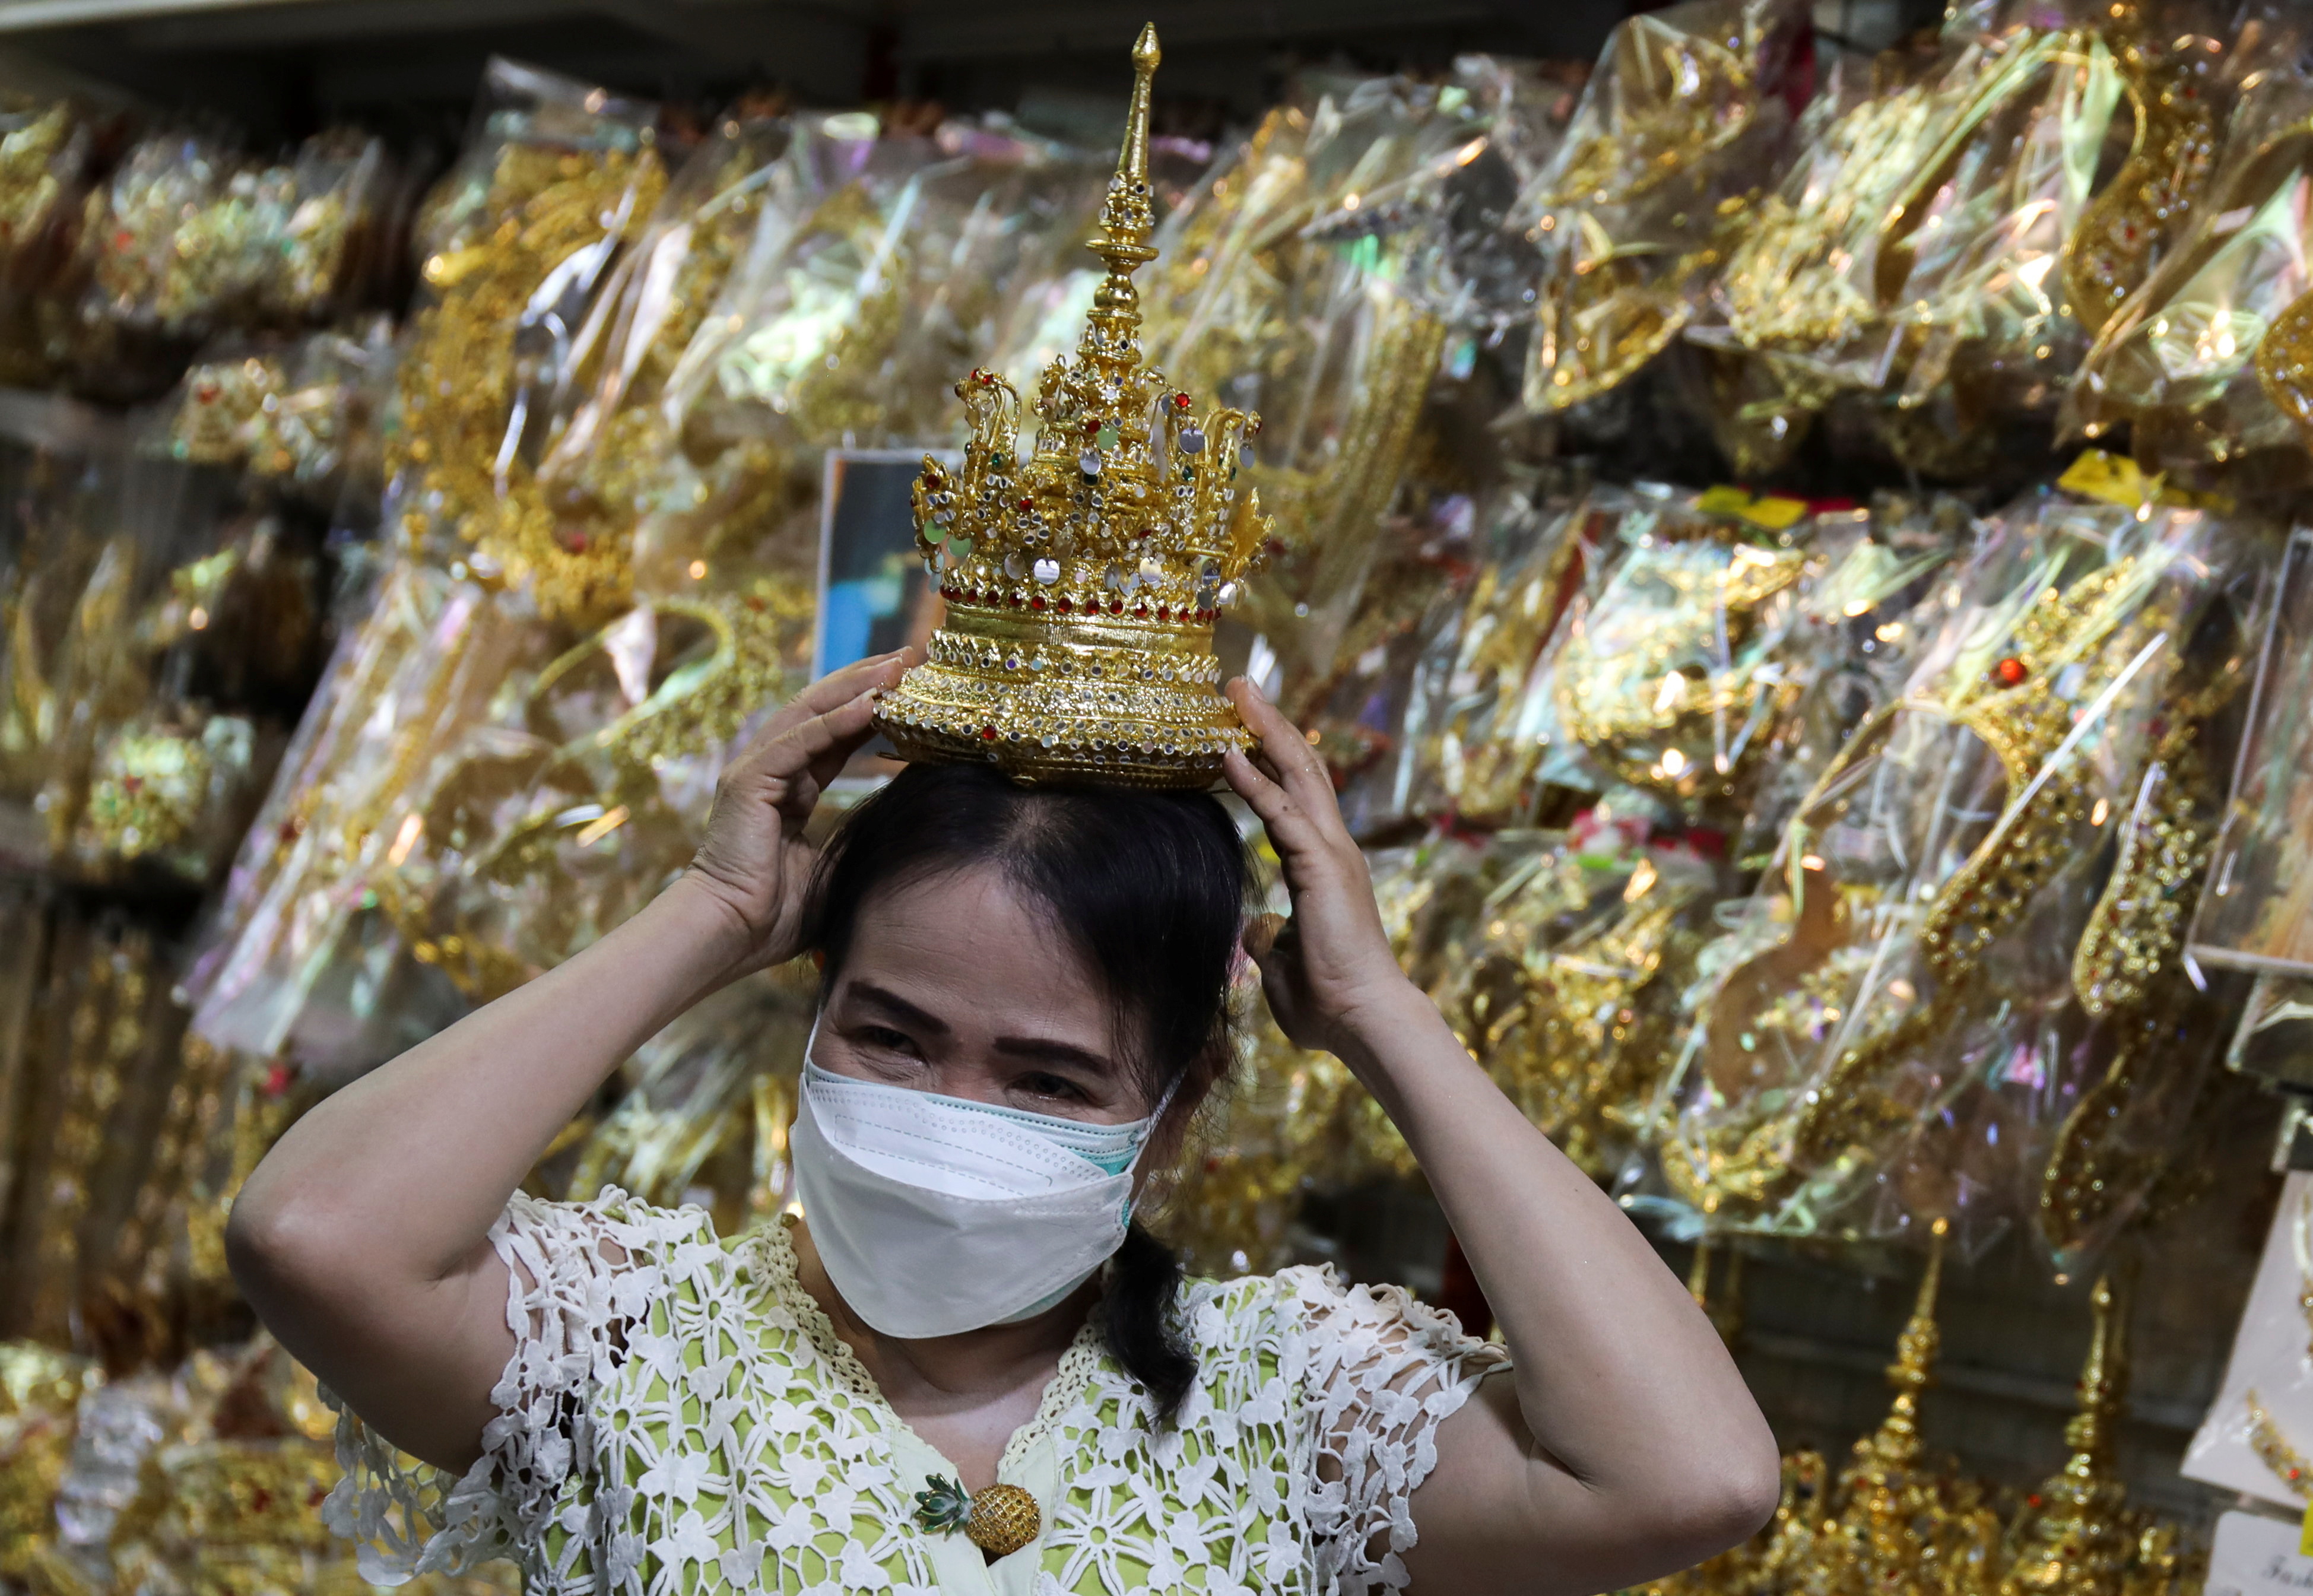 Shop keeper displays a Thai traditional costume head gear similar to one wore by K-pop singer Lisa at a shop selling merchandise items in Bangkok